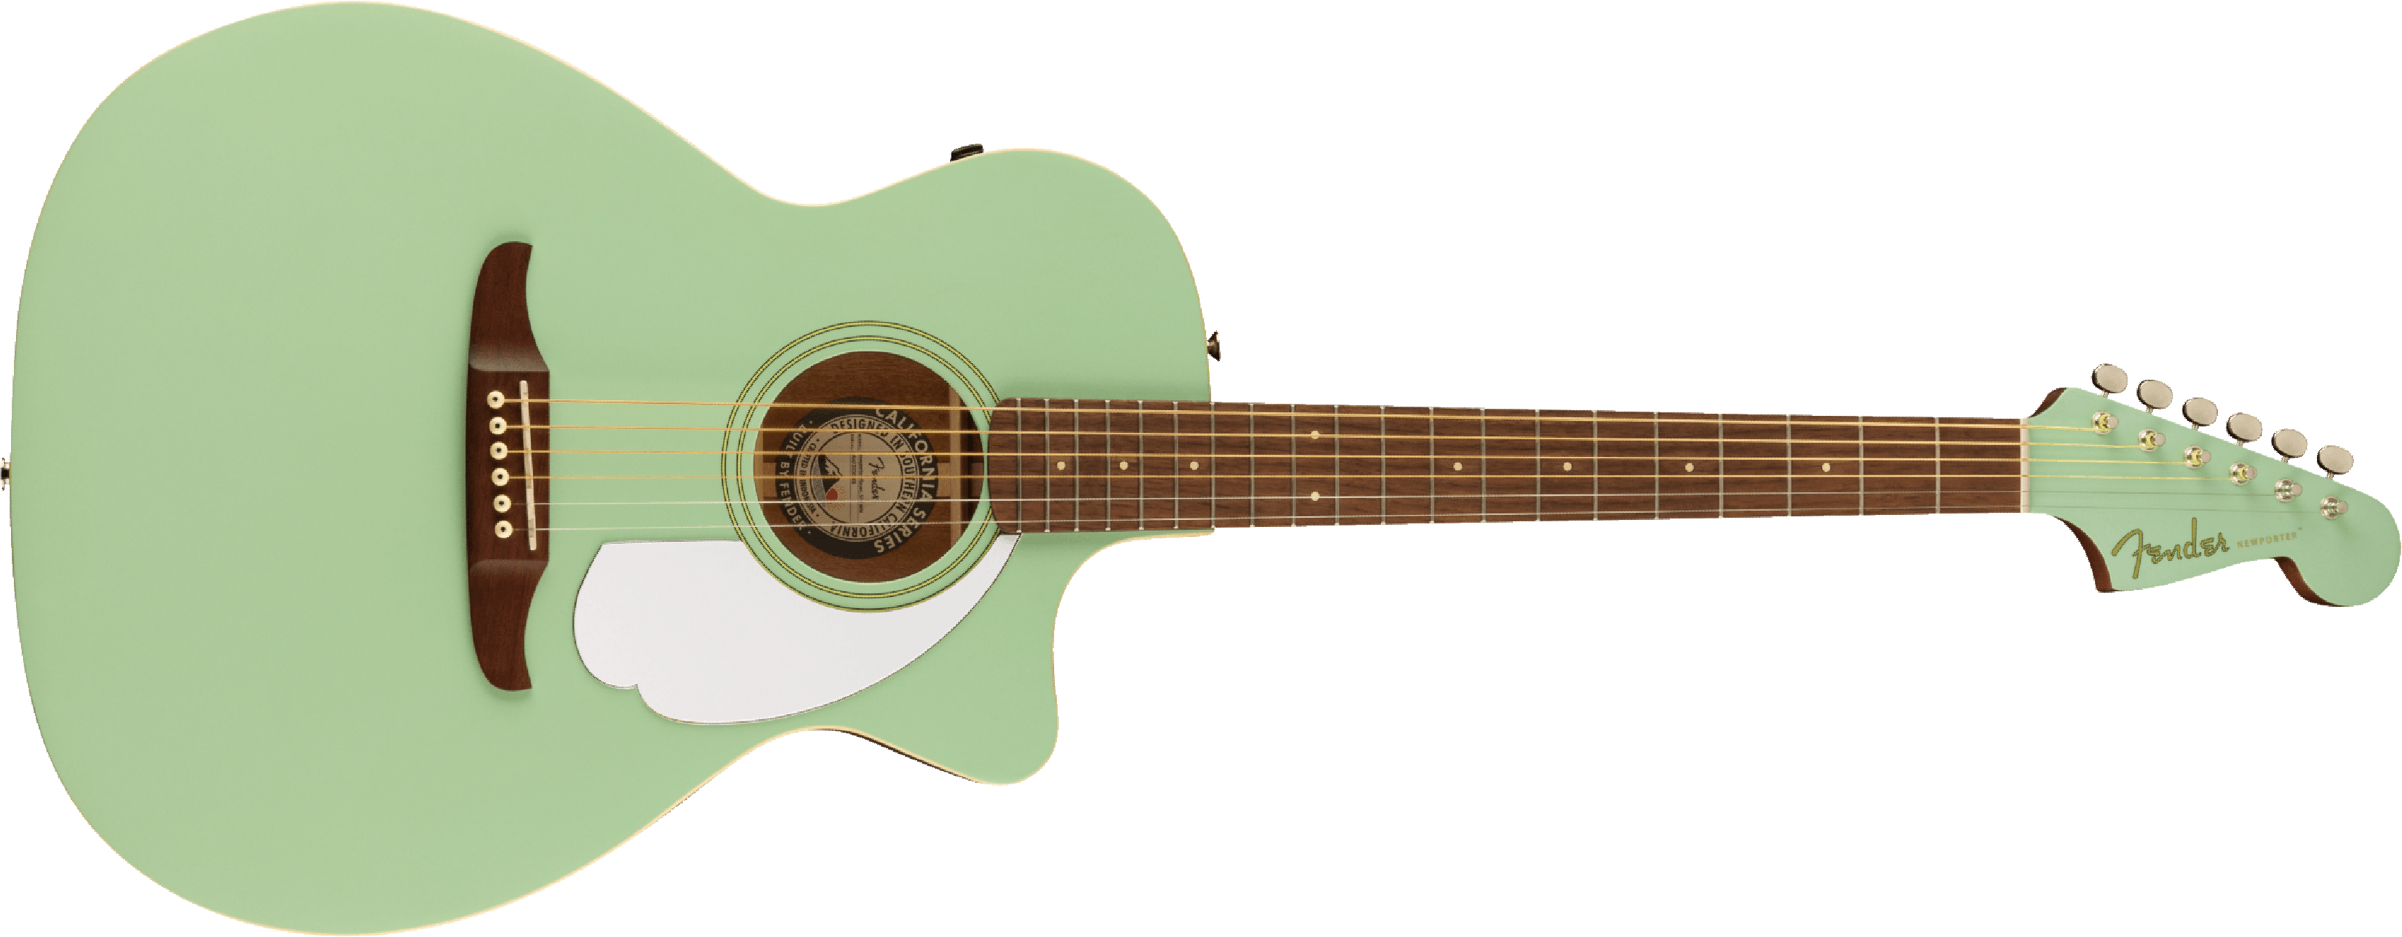 Fender Newport Player Cw Epicea Sapelle - Surf Green - Electro acoustic guitar - Main picture